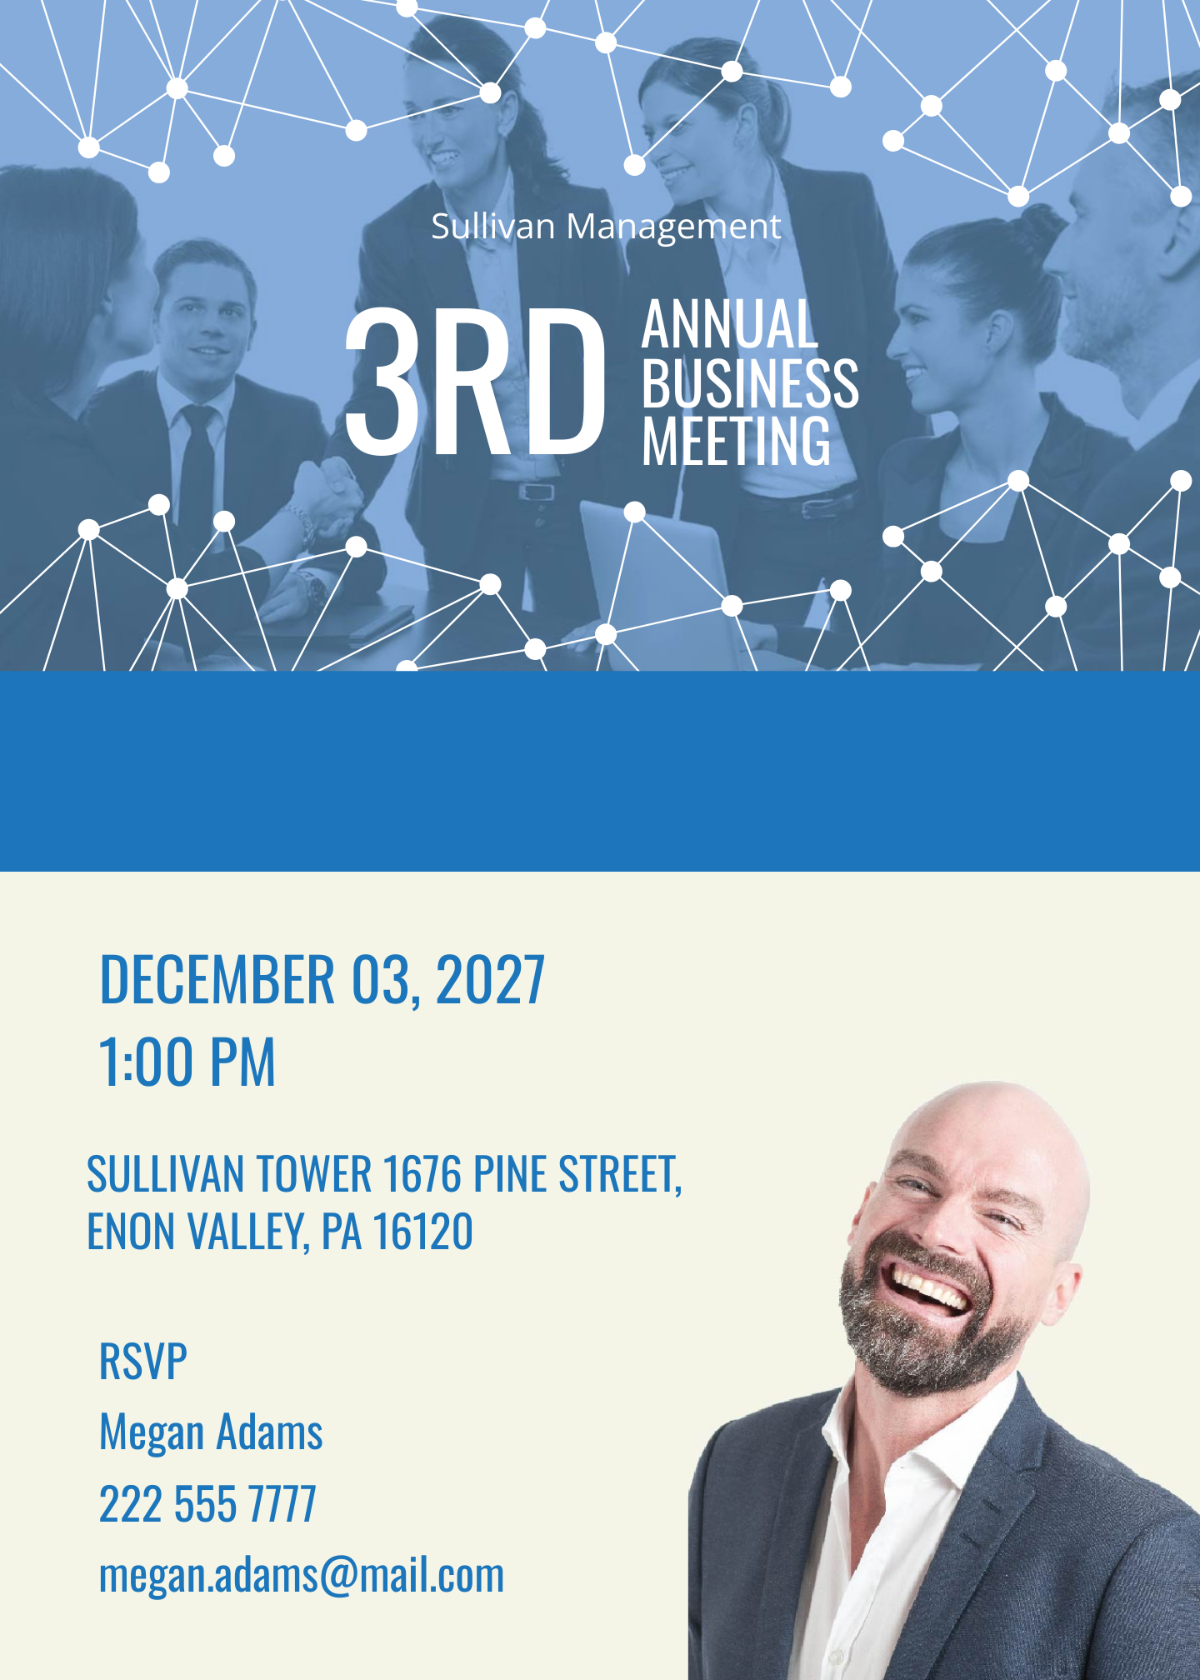 Annual Business Meeting Invitation